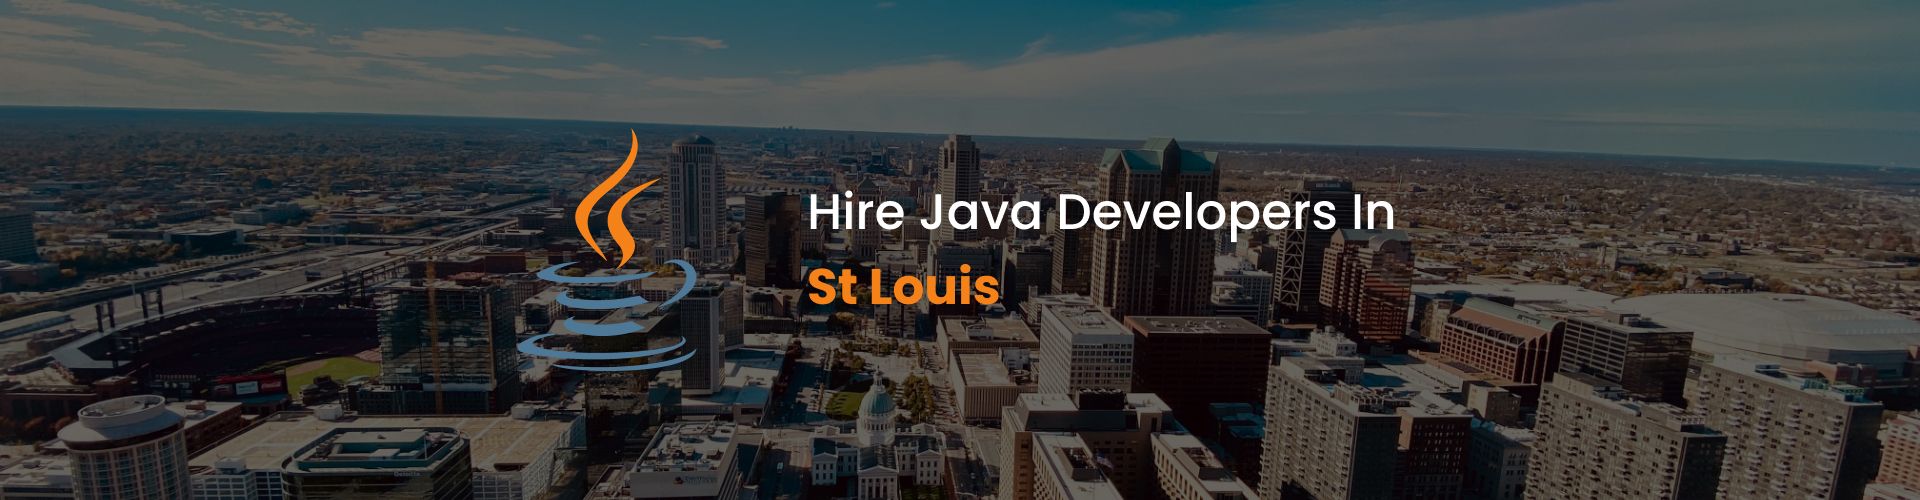 hire java developers in st louis